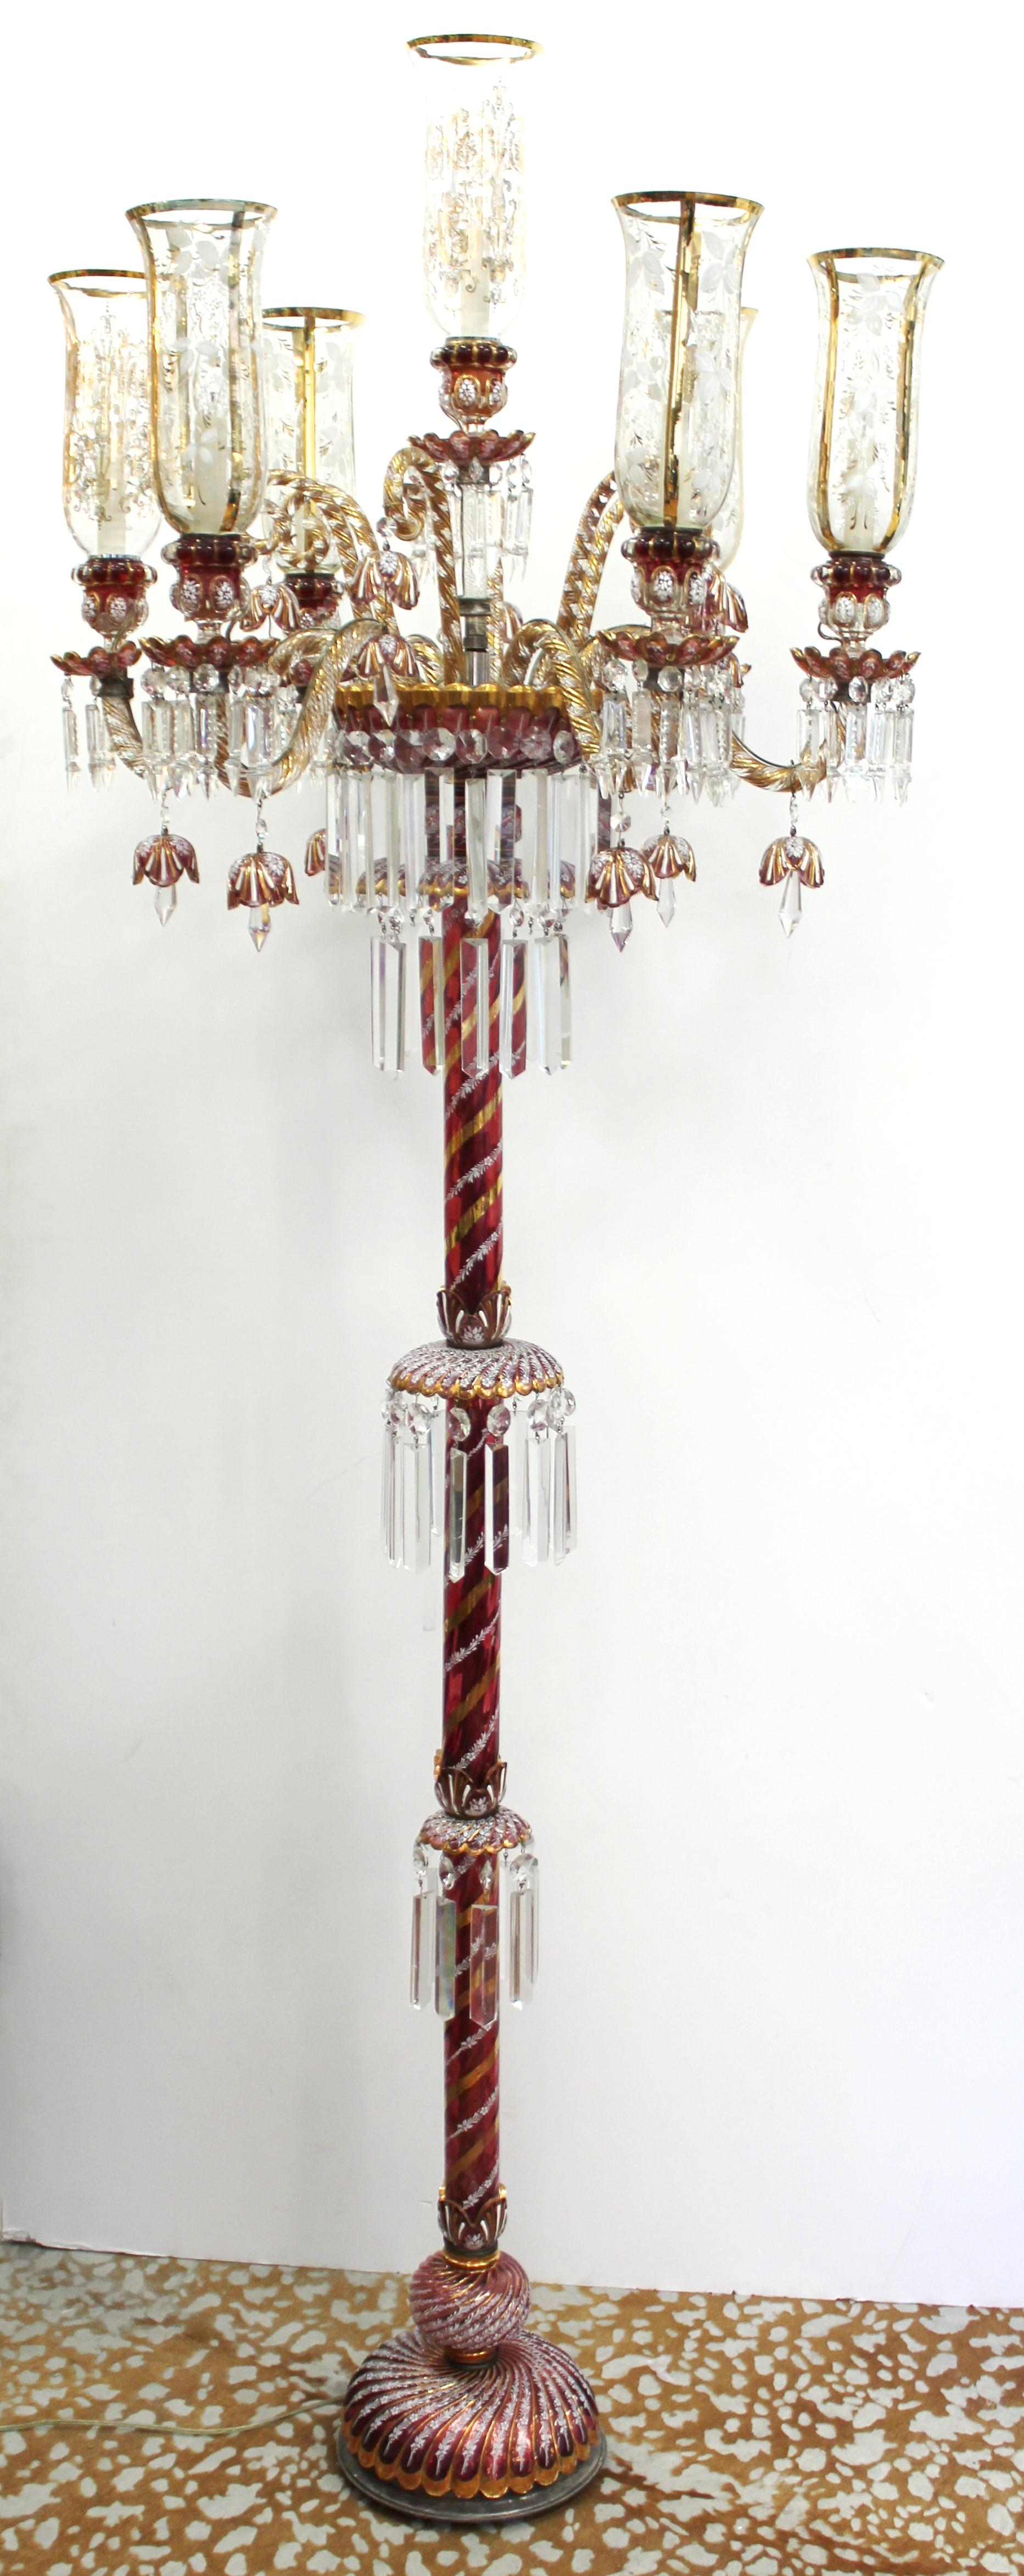 Victorian Baccarat Style Ruby & Gold Crystal Torchiere Lamps